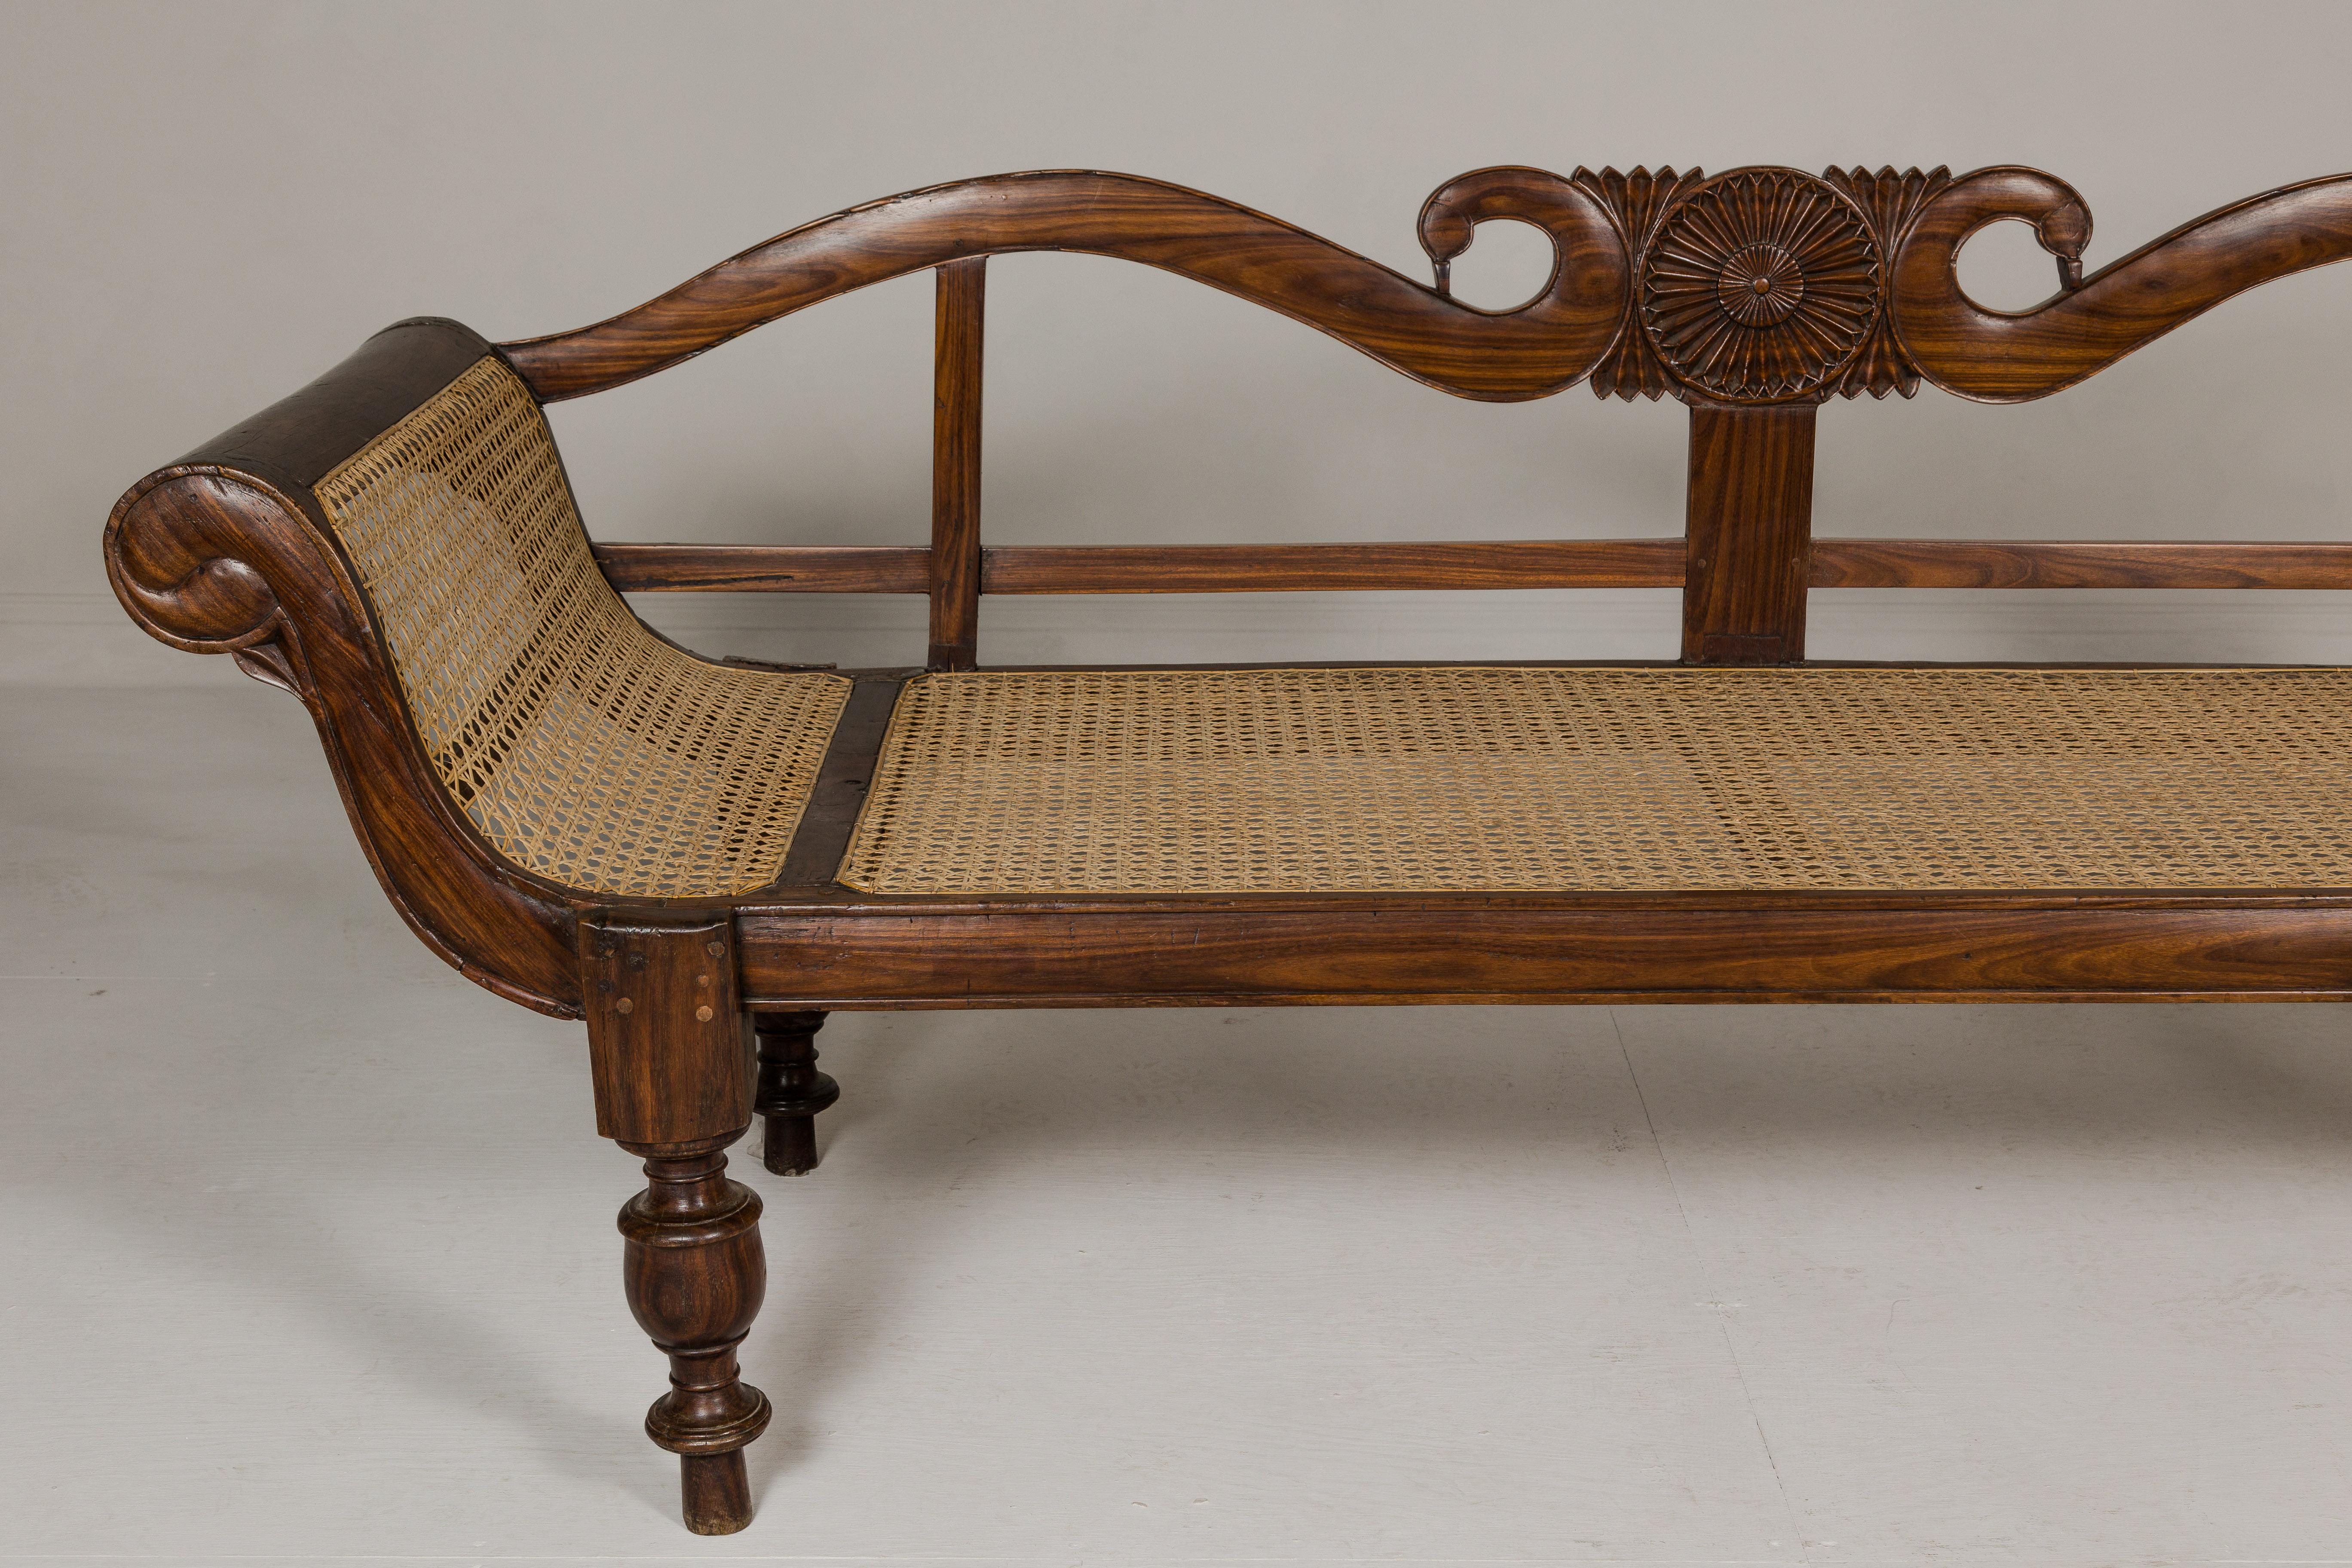 British Colonial Carved and Cane Settee with Swan Neck Back and Scrolling Arms In Good Condition For Sale In Yonkers, NY